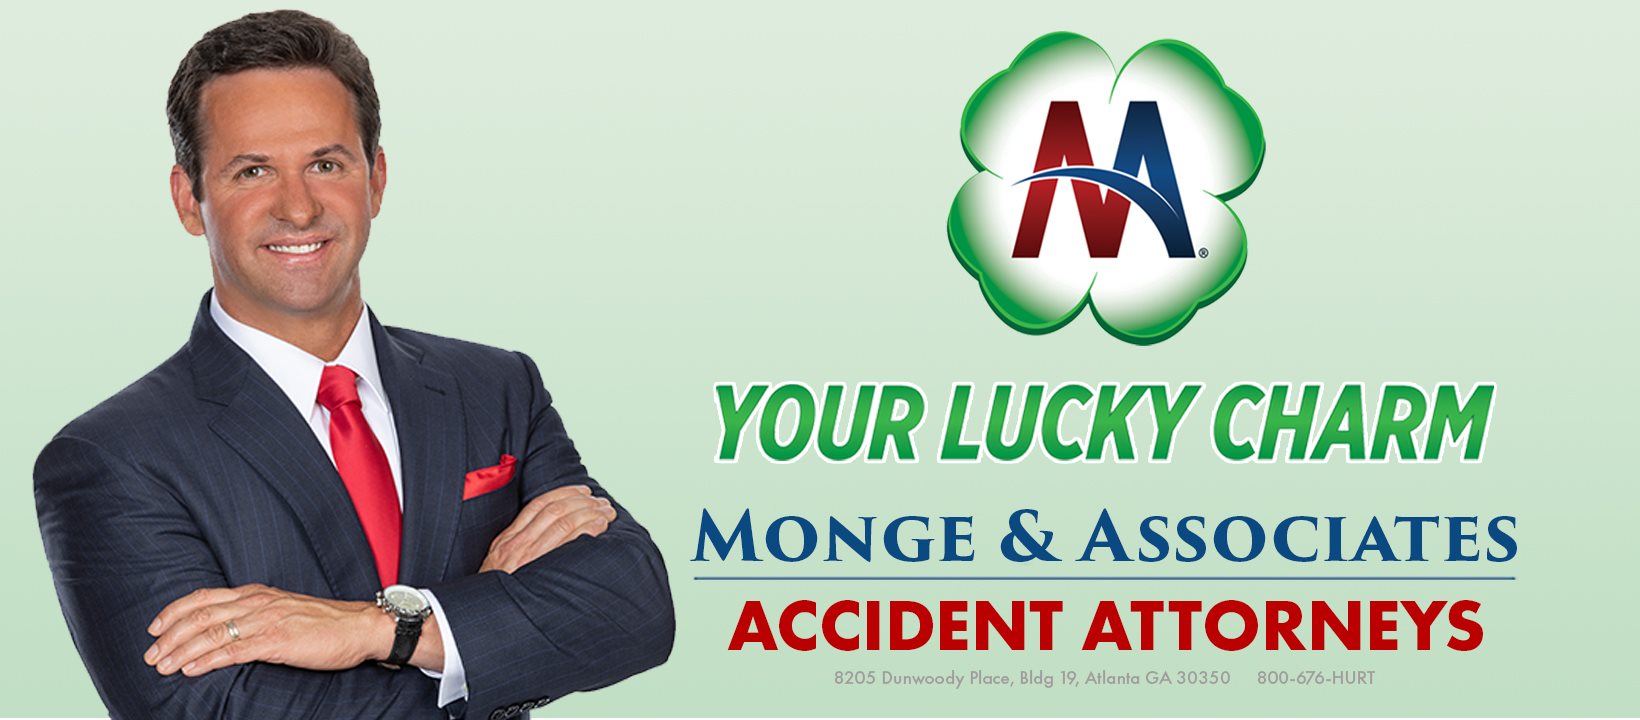 Monge & Associates Injury and Accident Attorneys | 1117 22nd St S Suite 202, Birmingham, AL 35205 | Phone: (205) 419-7862